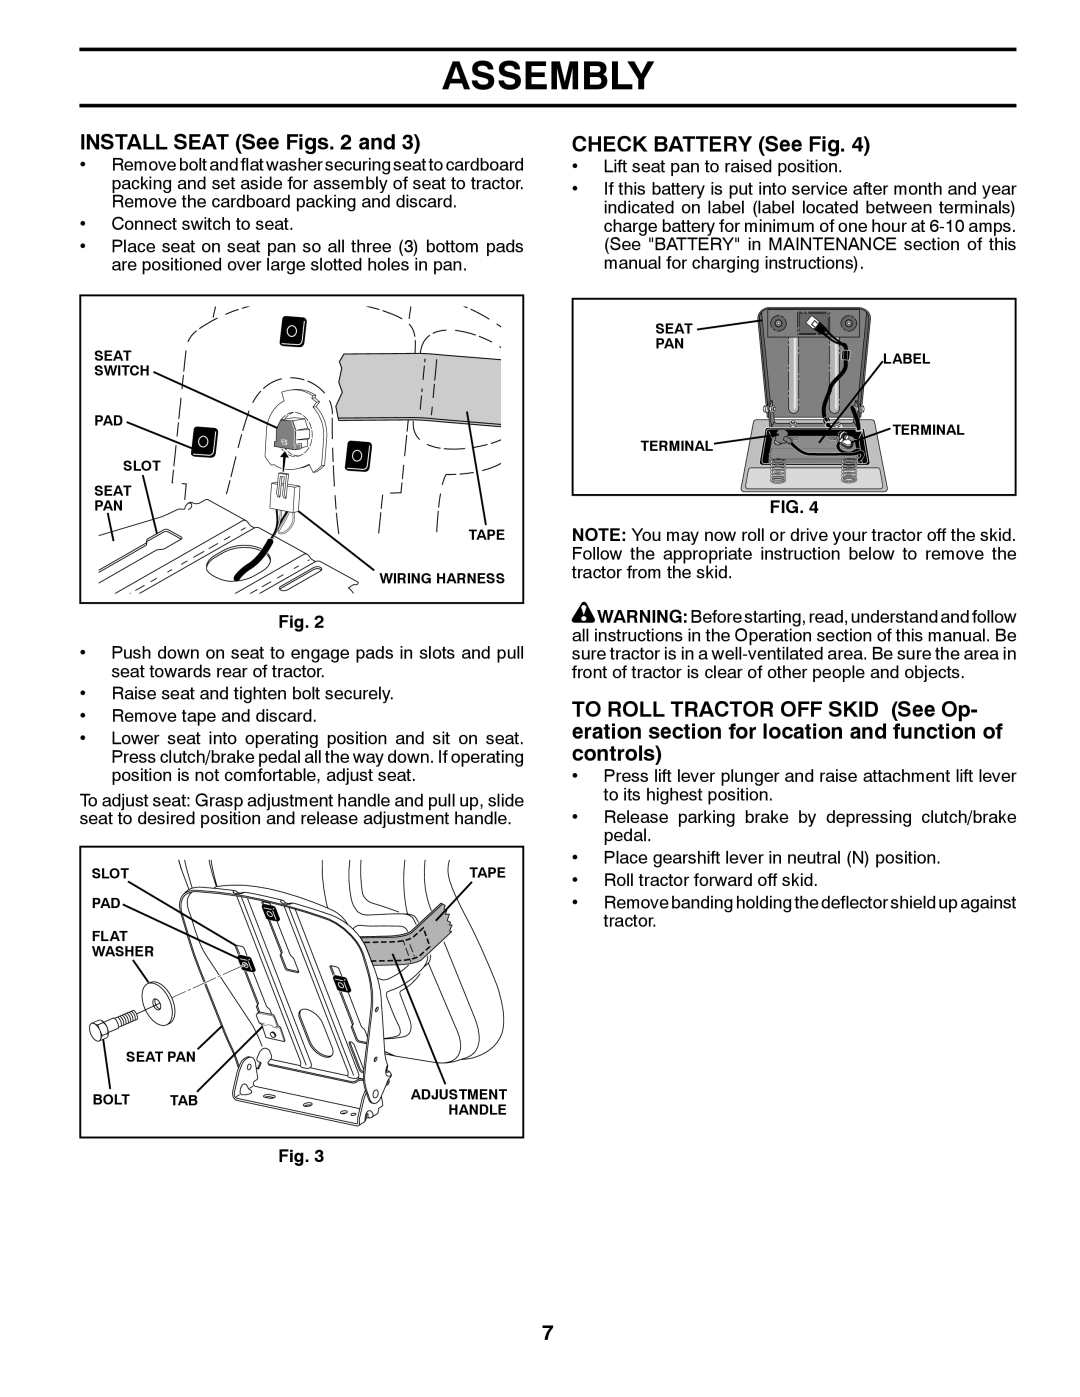 Poulan 96042002400 owner manual INSTALL SEAT See Figs. 2 and, CHECK BATTERY See Fig, Assembly 